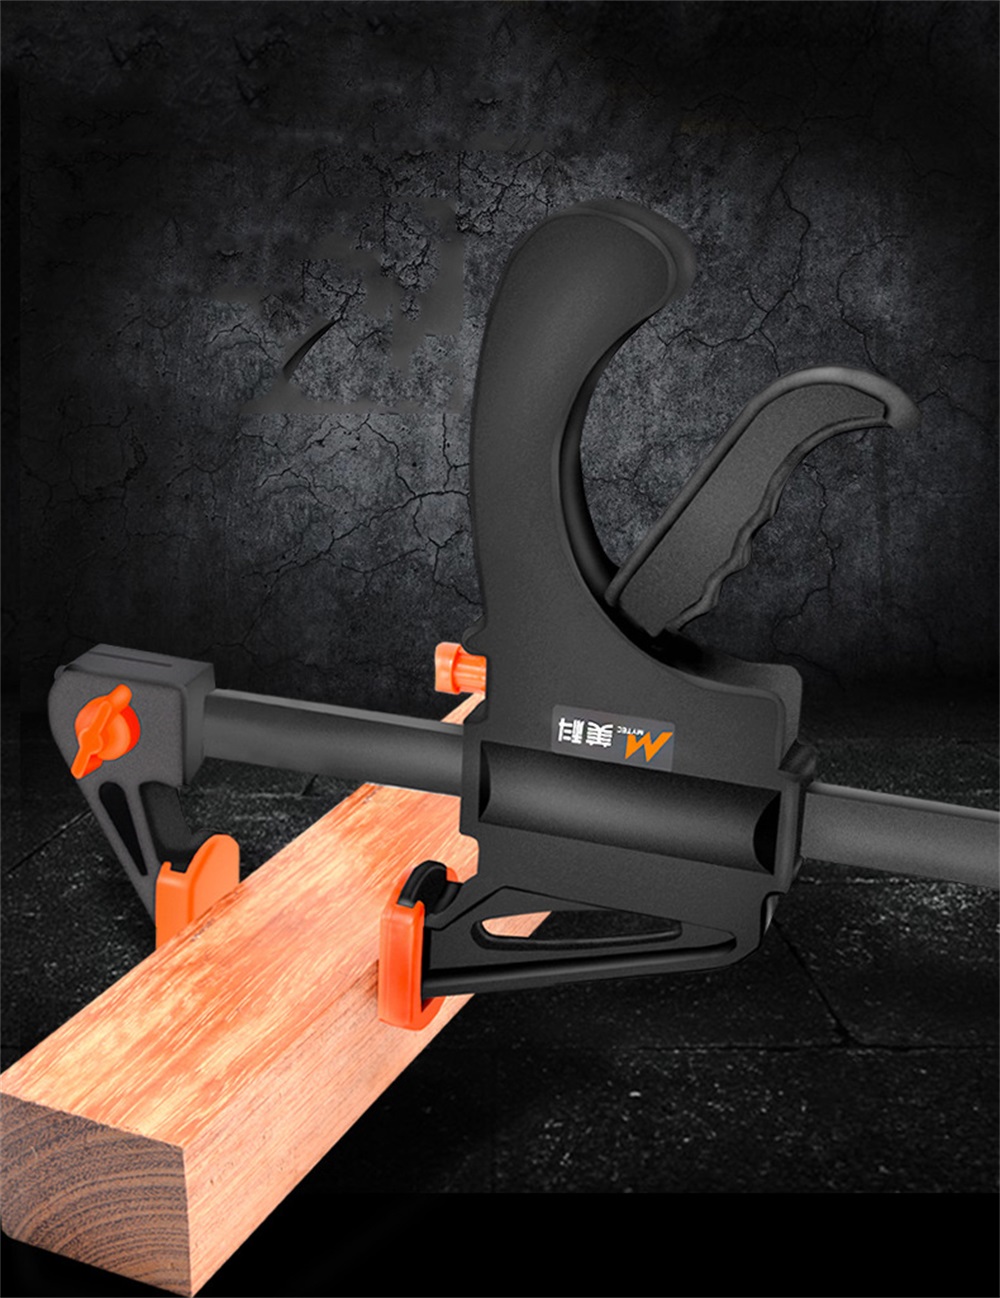 MYTEC-Fast-Woodworking-Clamp-Jigsaw-Clamp-F-Clamp-Two-Way-Fixed-F-Clamp-Woodworking-Fast-Clamp-1856118-11